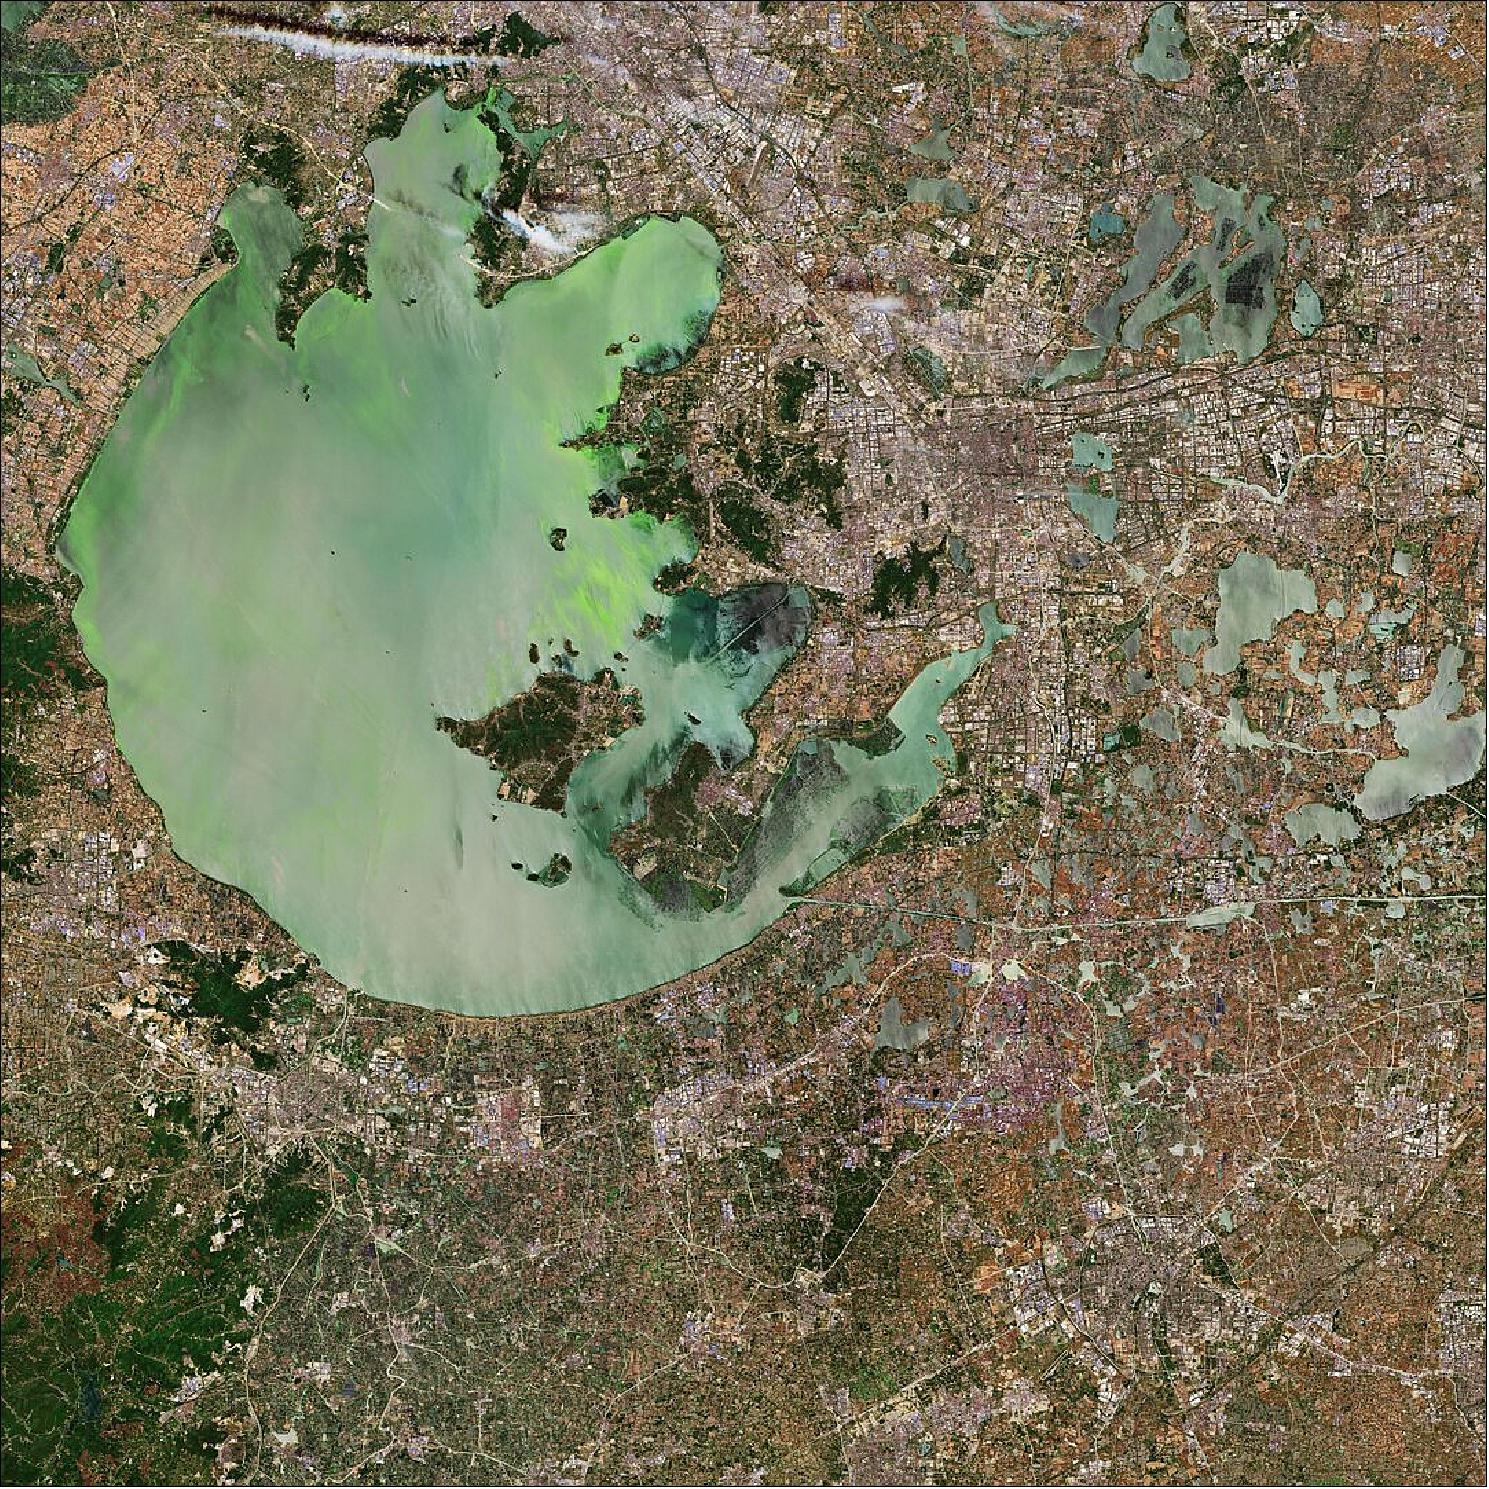 Figure 7: This Sentinel-2 image was captured on 24 May 2019, the algae-infested waters are clearly visible. The image is also featured on the Earth from Space video program (image credit: ESA, the image contains modified Copernicus Sentinel data (2019), processed by ESA, CC BY-SA 3.0 IGO)